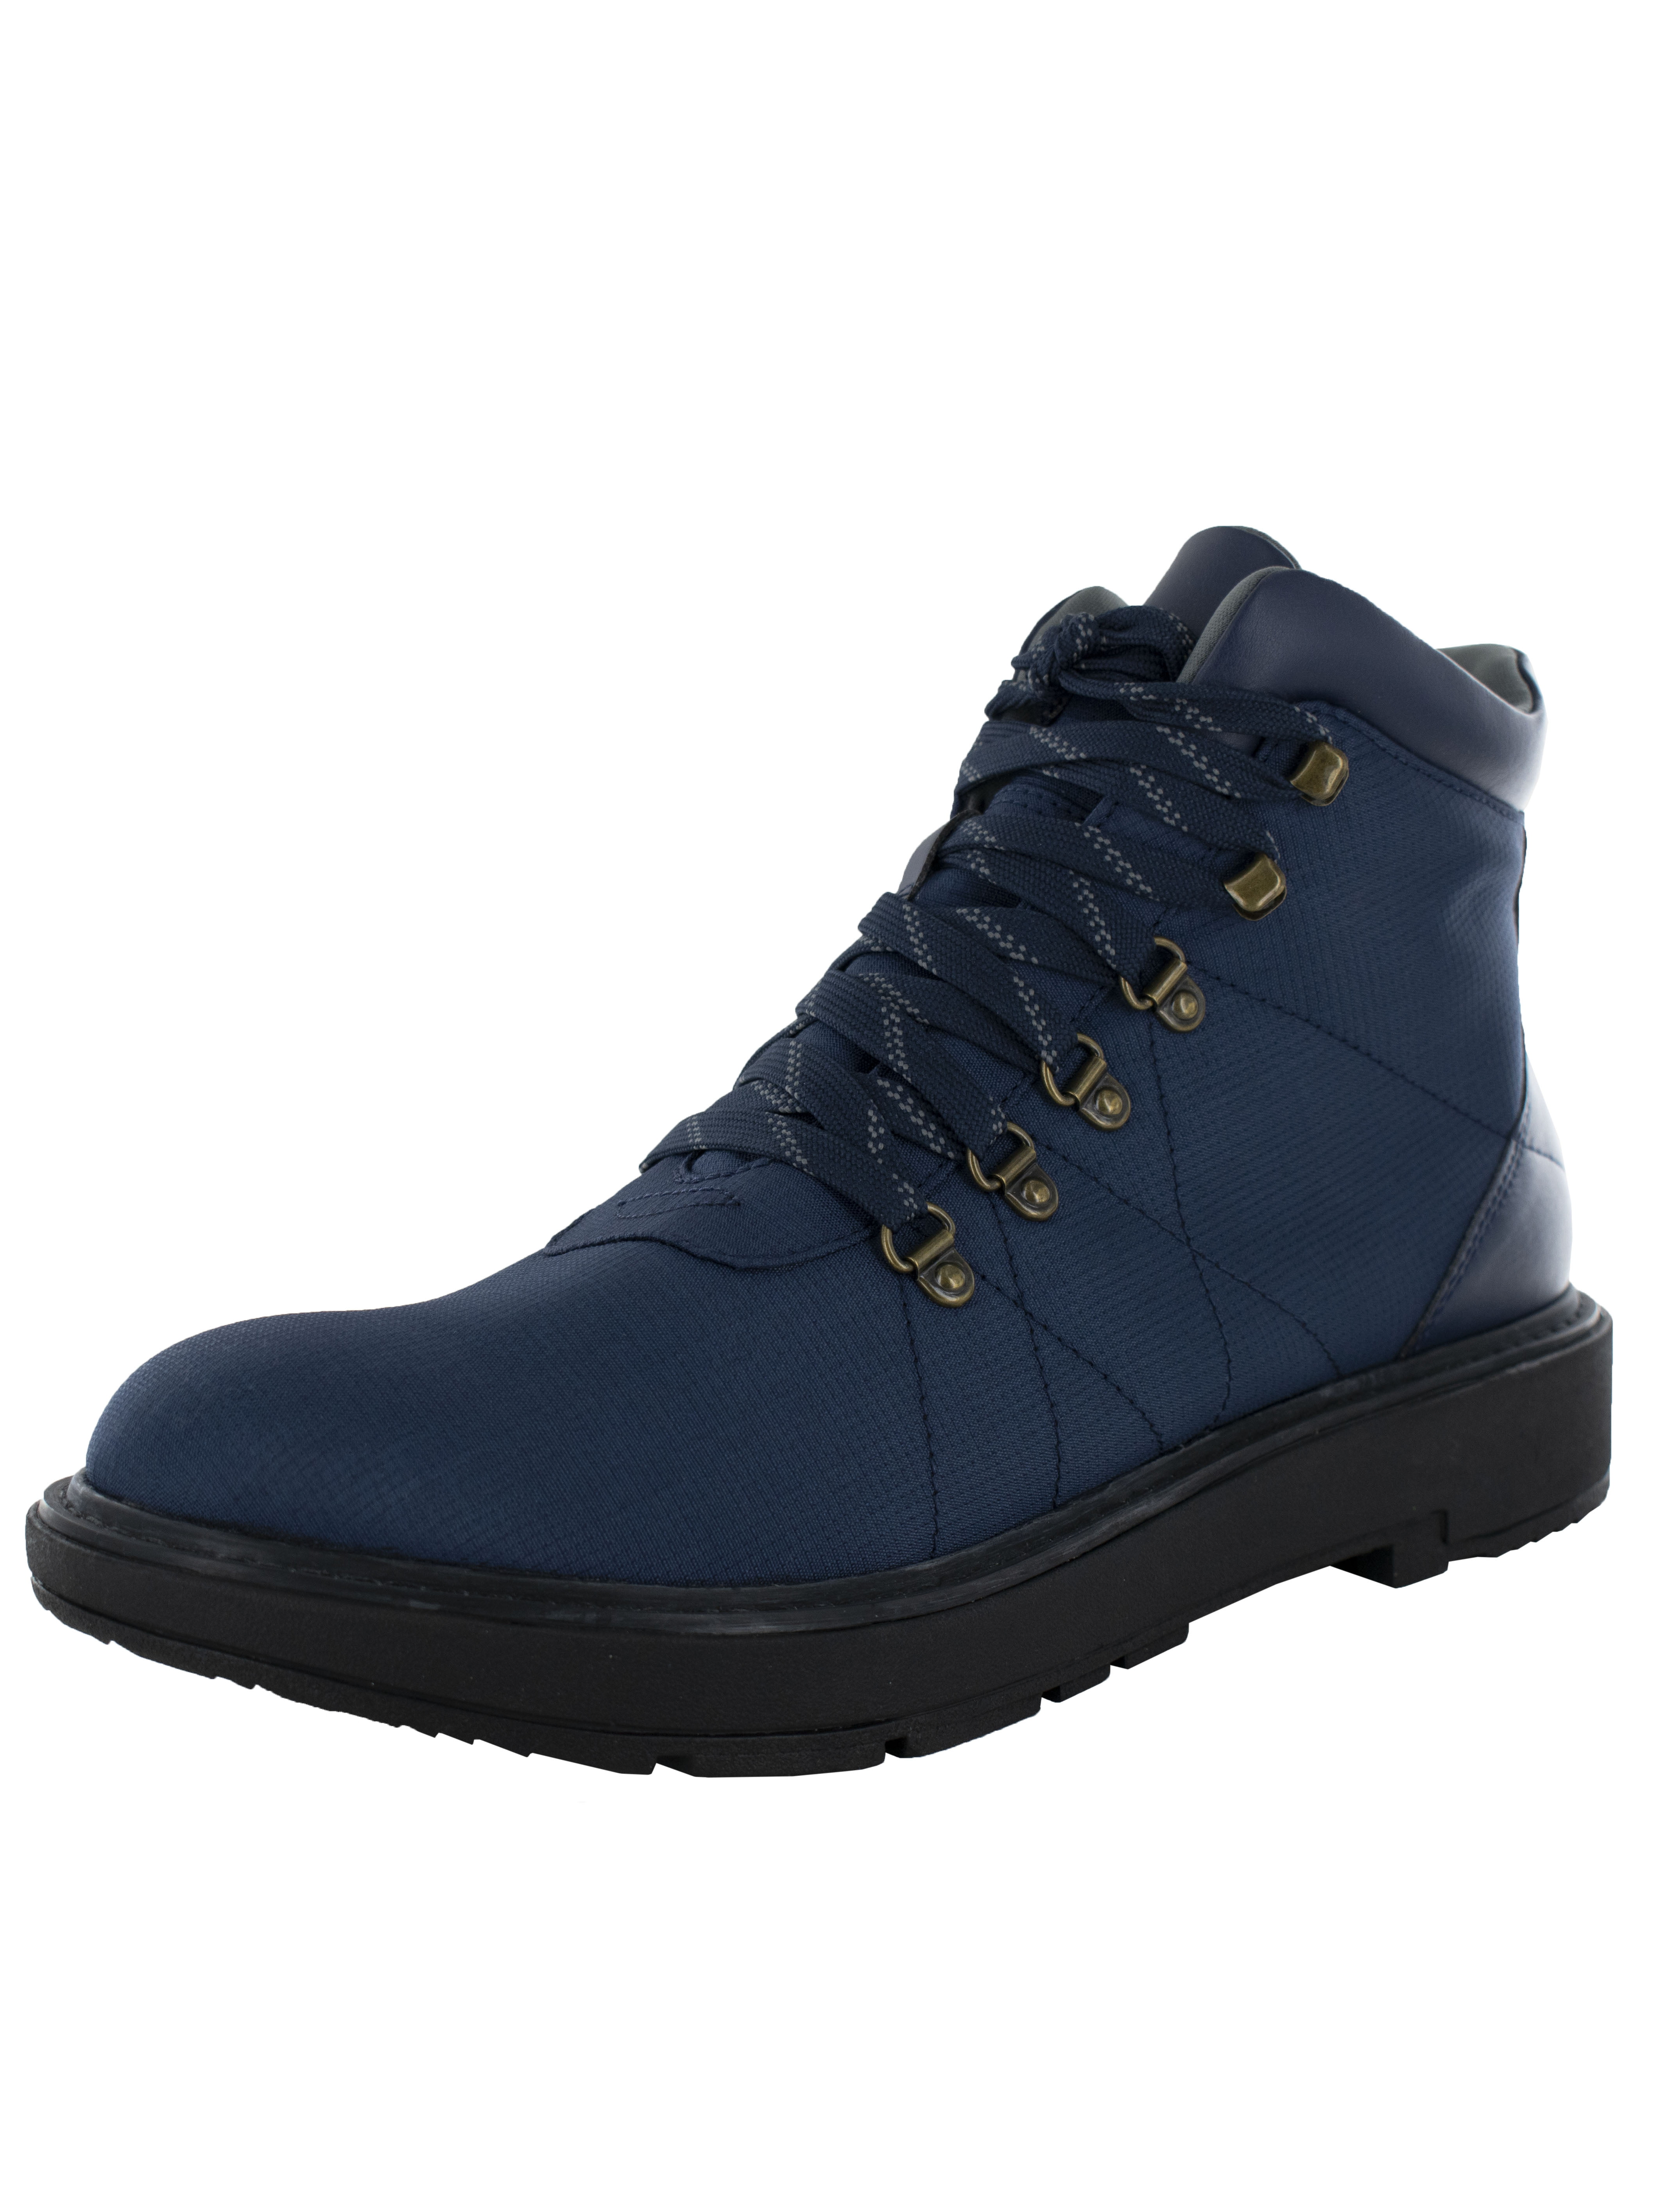 Unisex Academy Navy Hi-top Rubber Front Ankle Summer Canvas Boots 